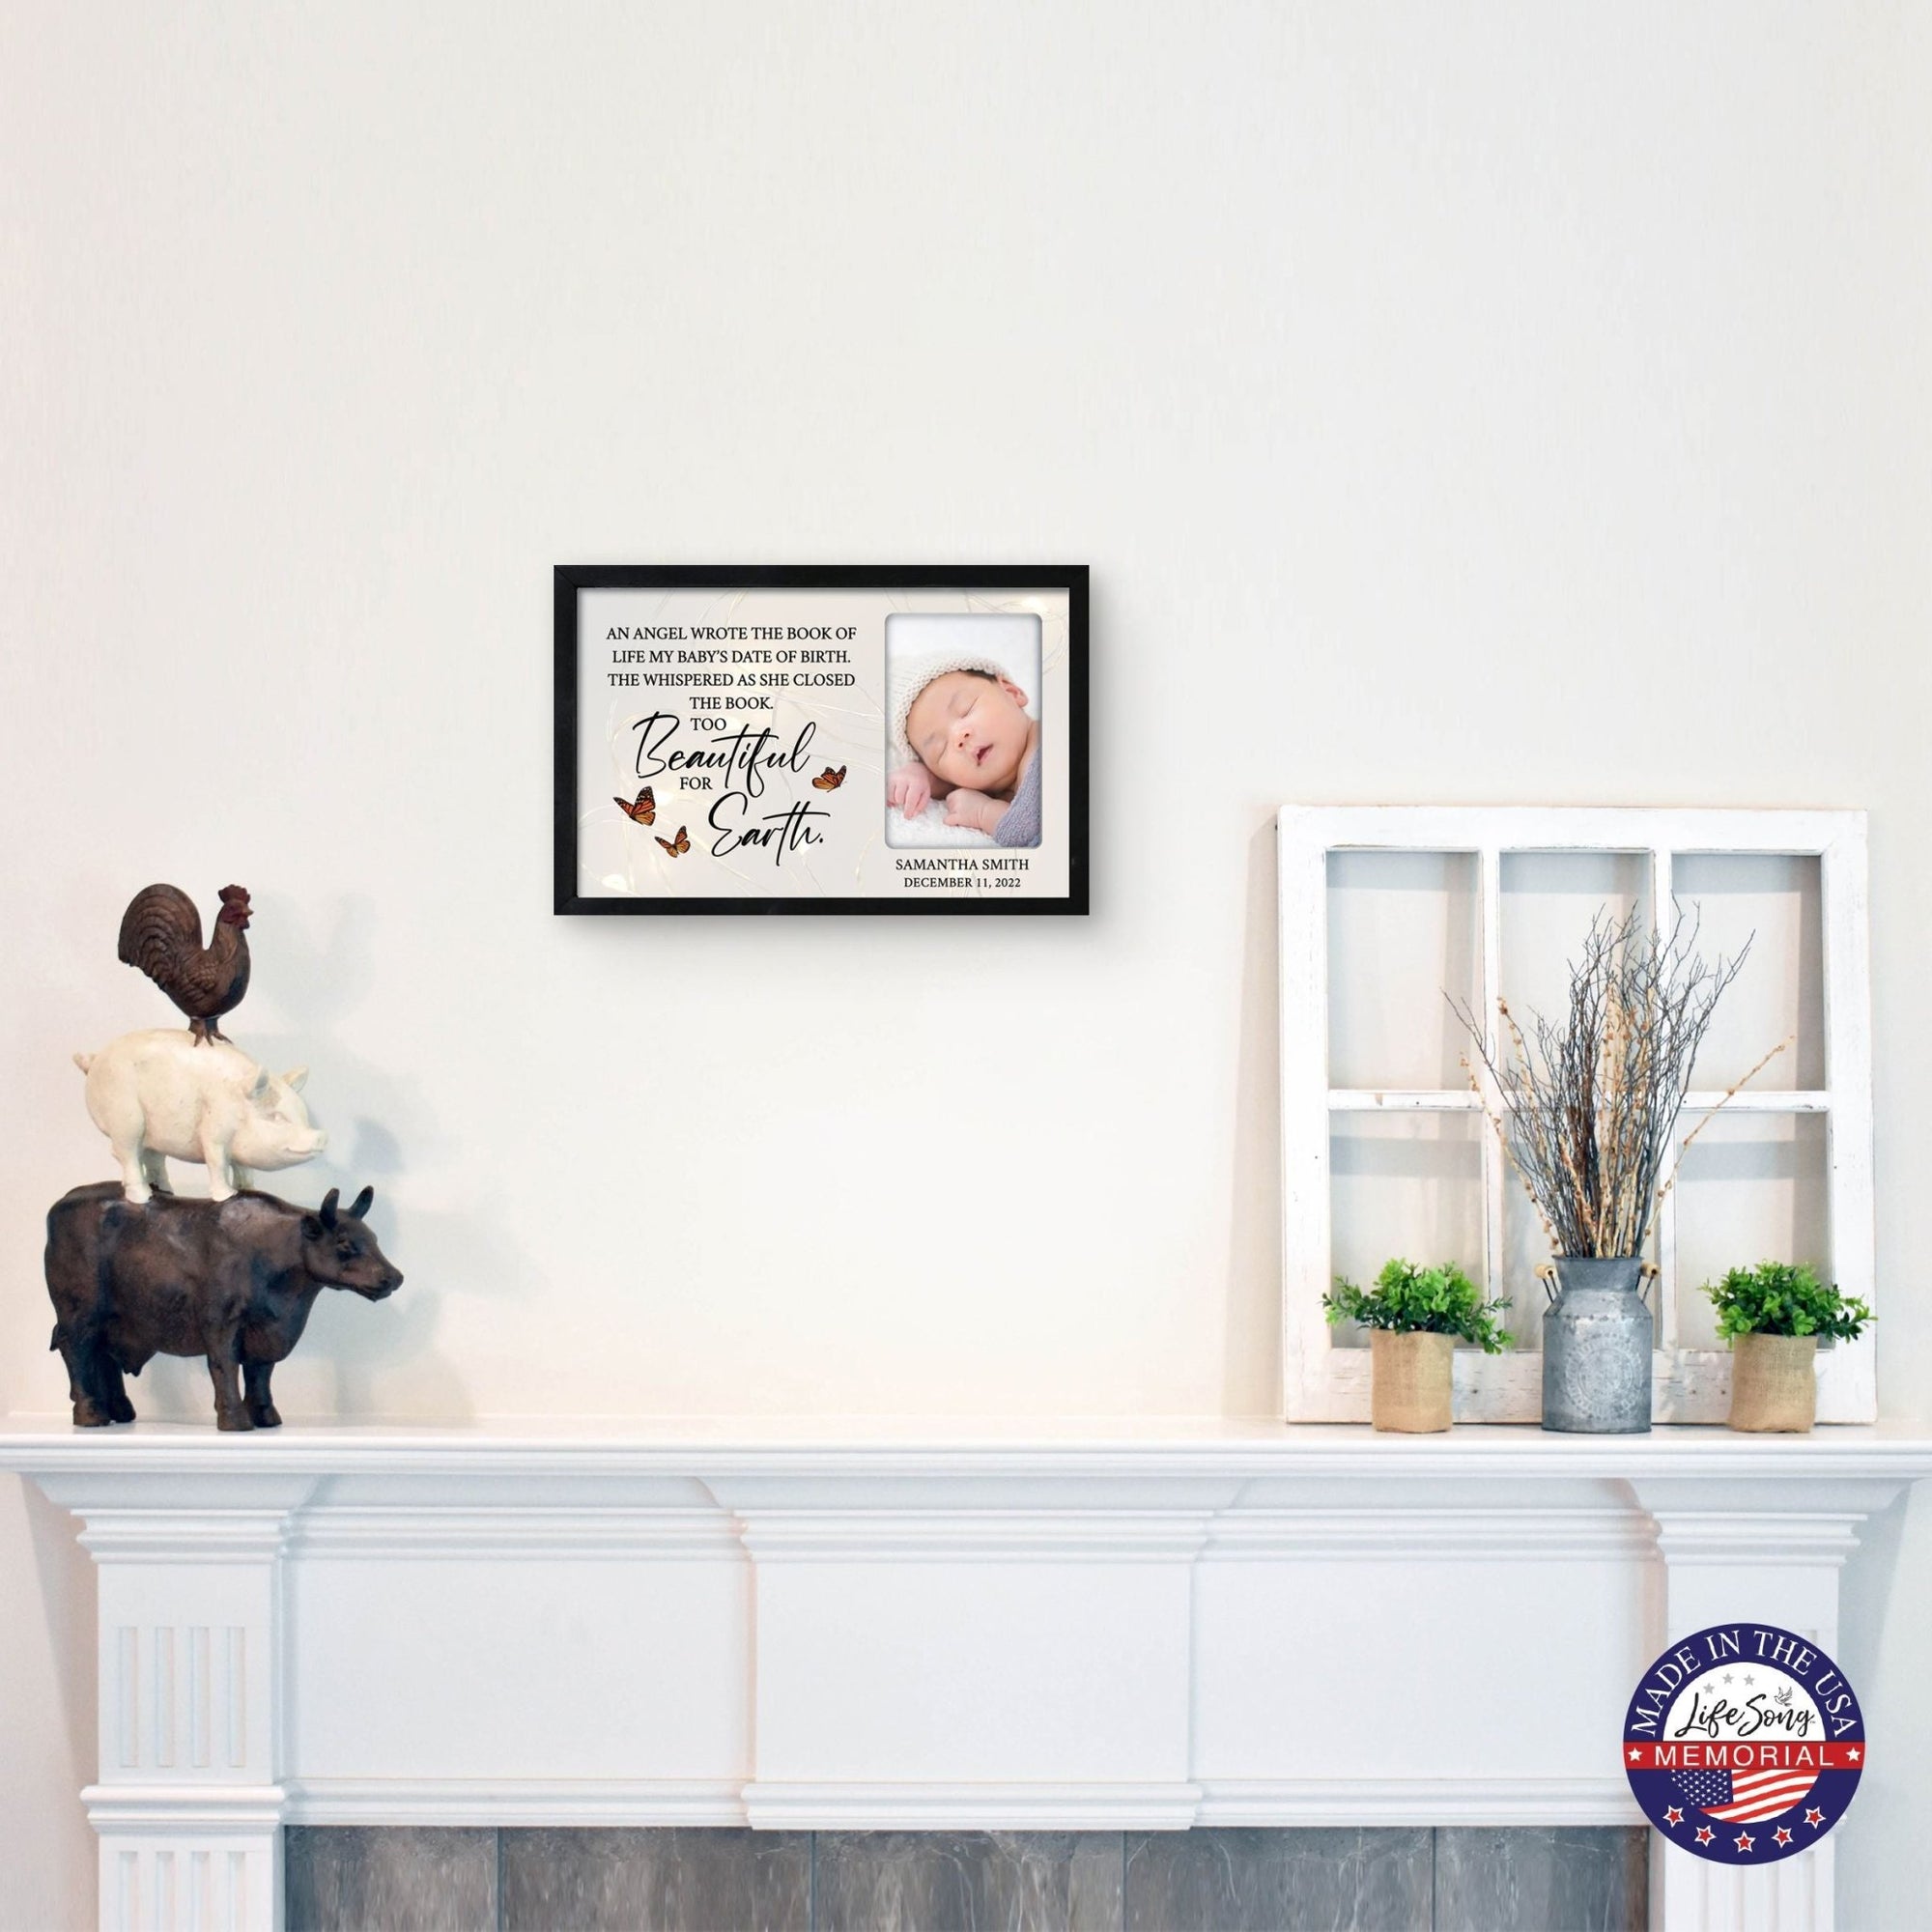 Personalized Memorial Black Framed Shadow Box With Lights Sympathy Gift Wall Décor - An Angel Who Wrote The Book - LifeSong Milestones